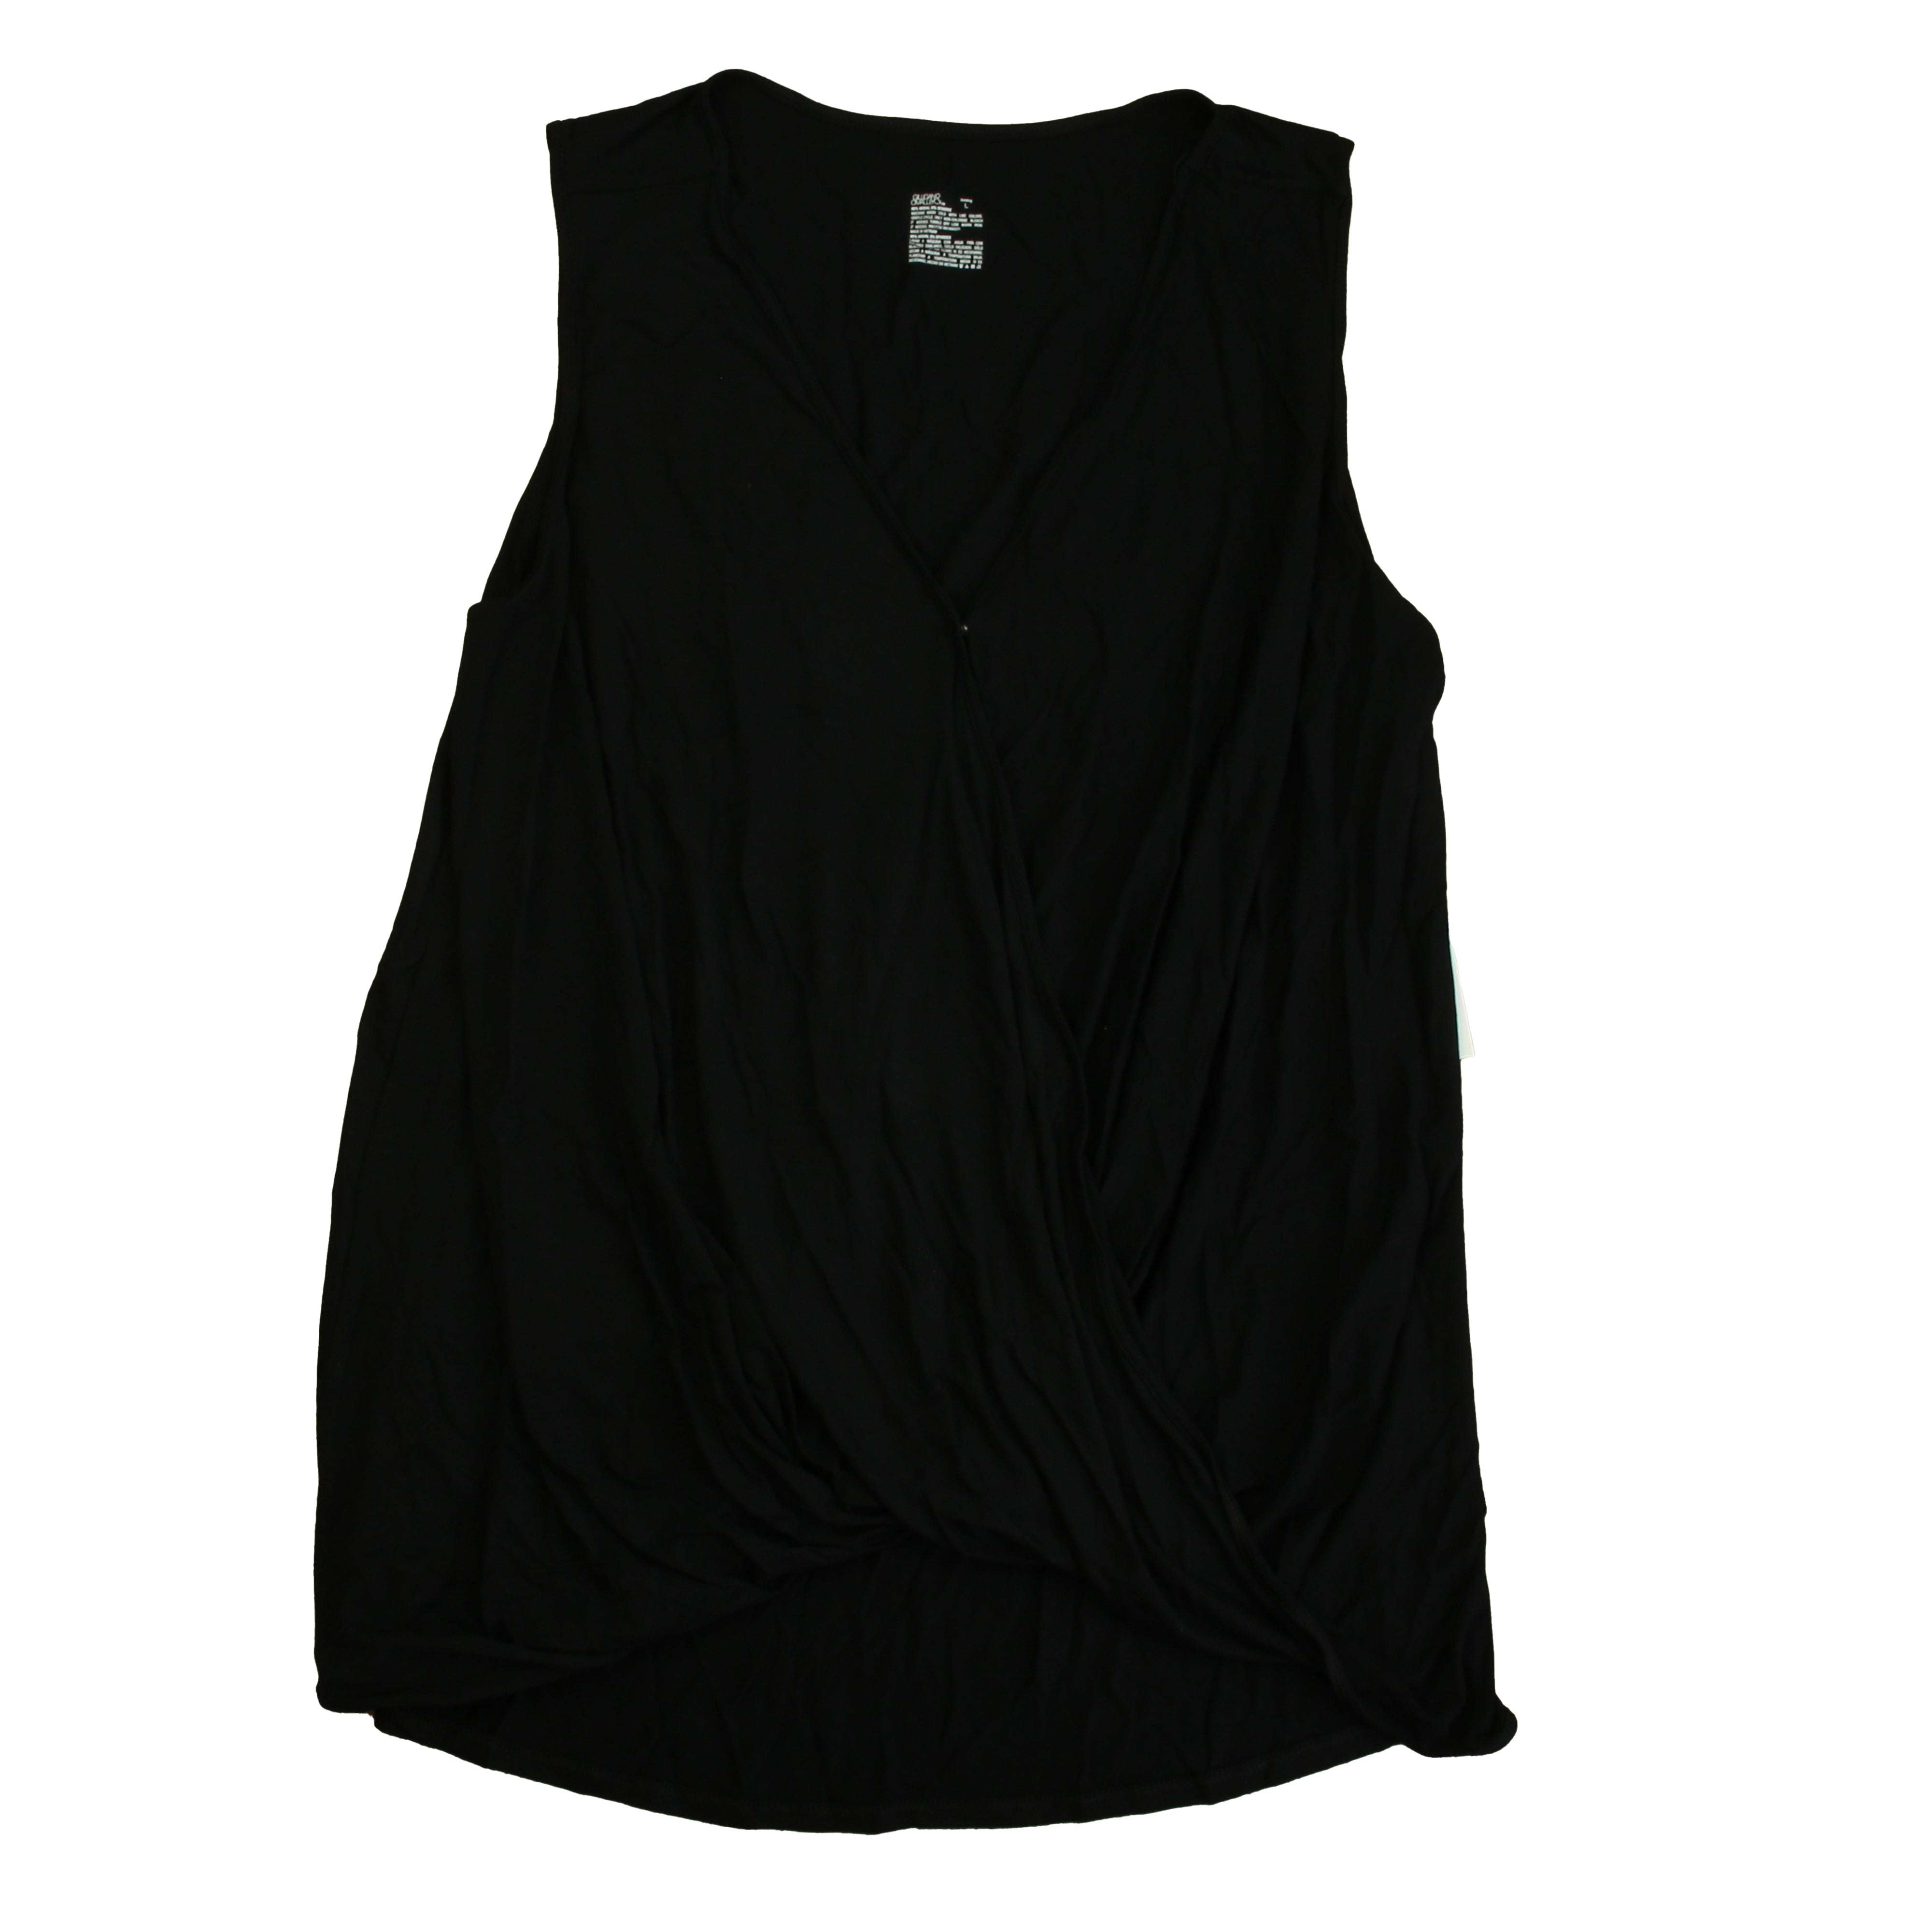 Pre-owned Black Tank Top size: Adult XS-XL